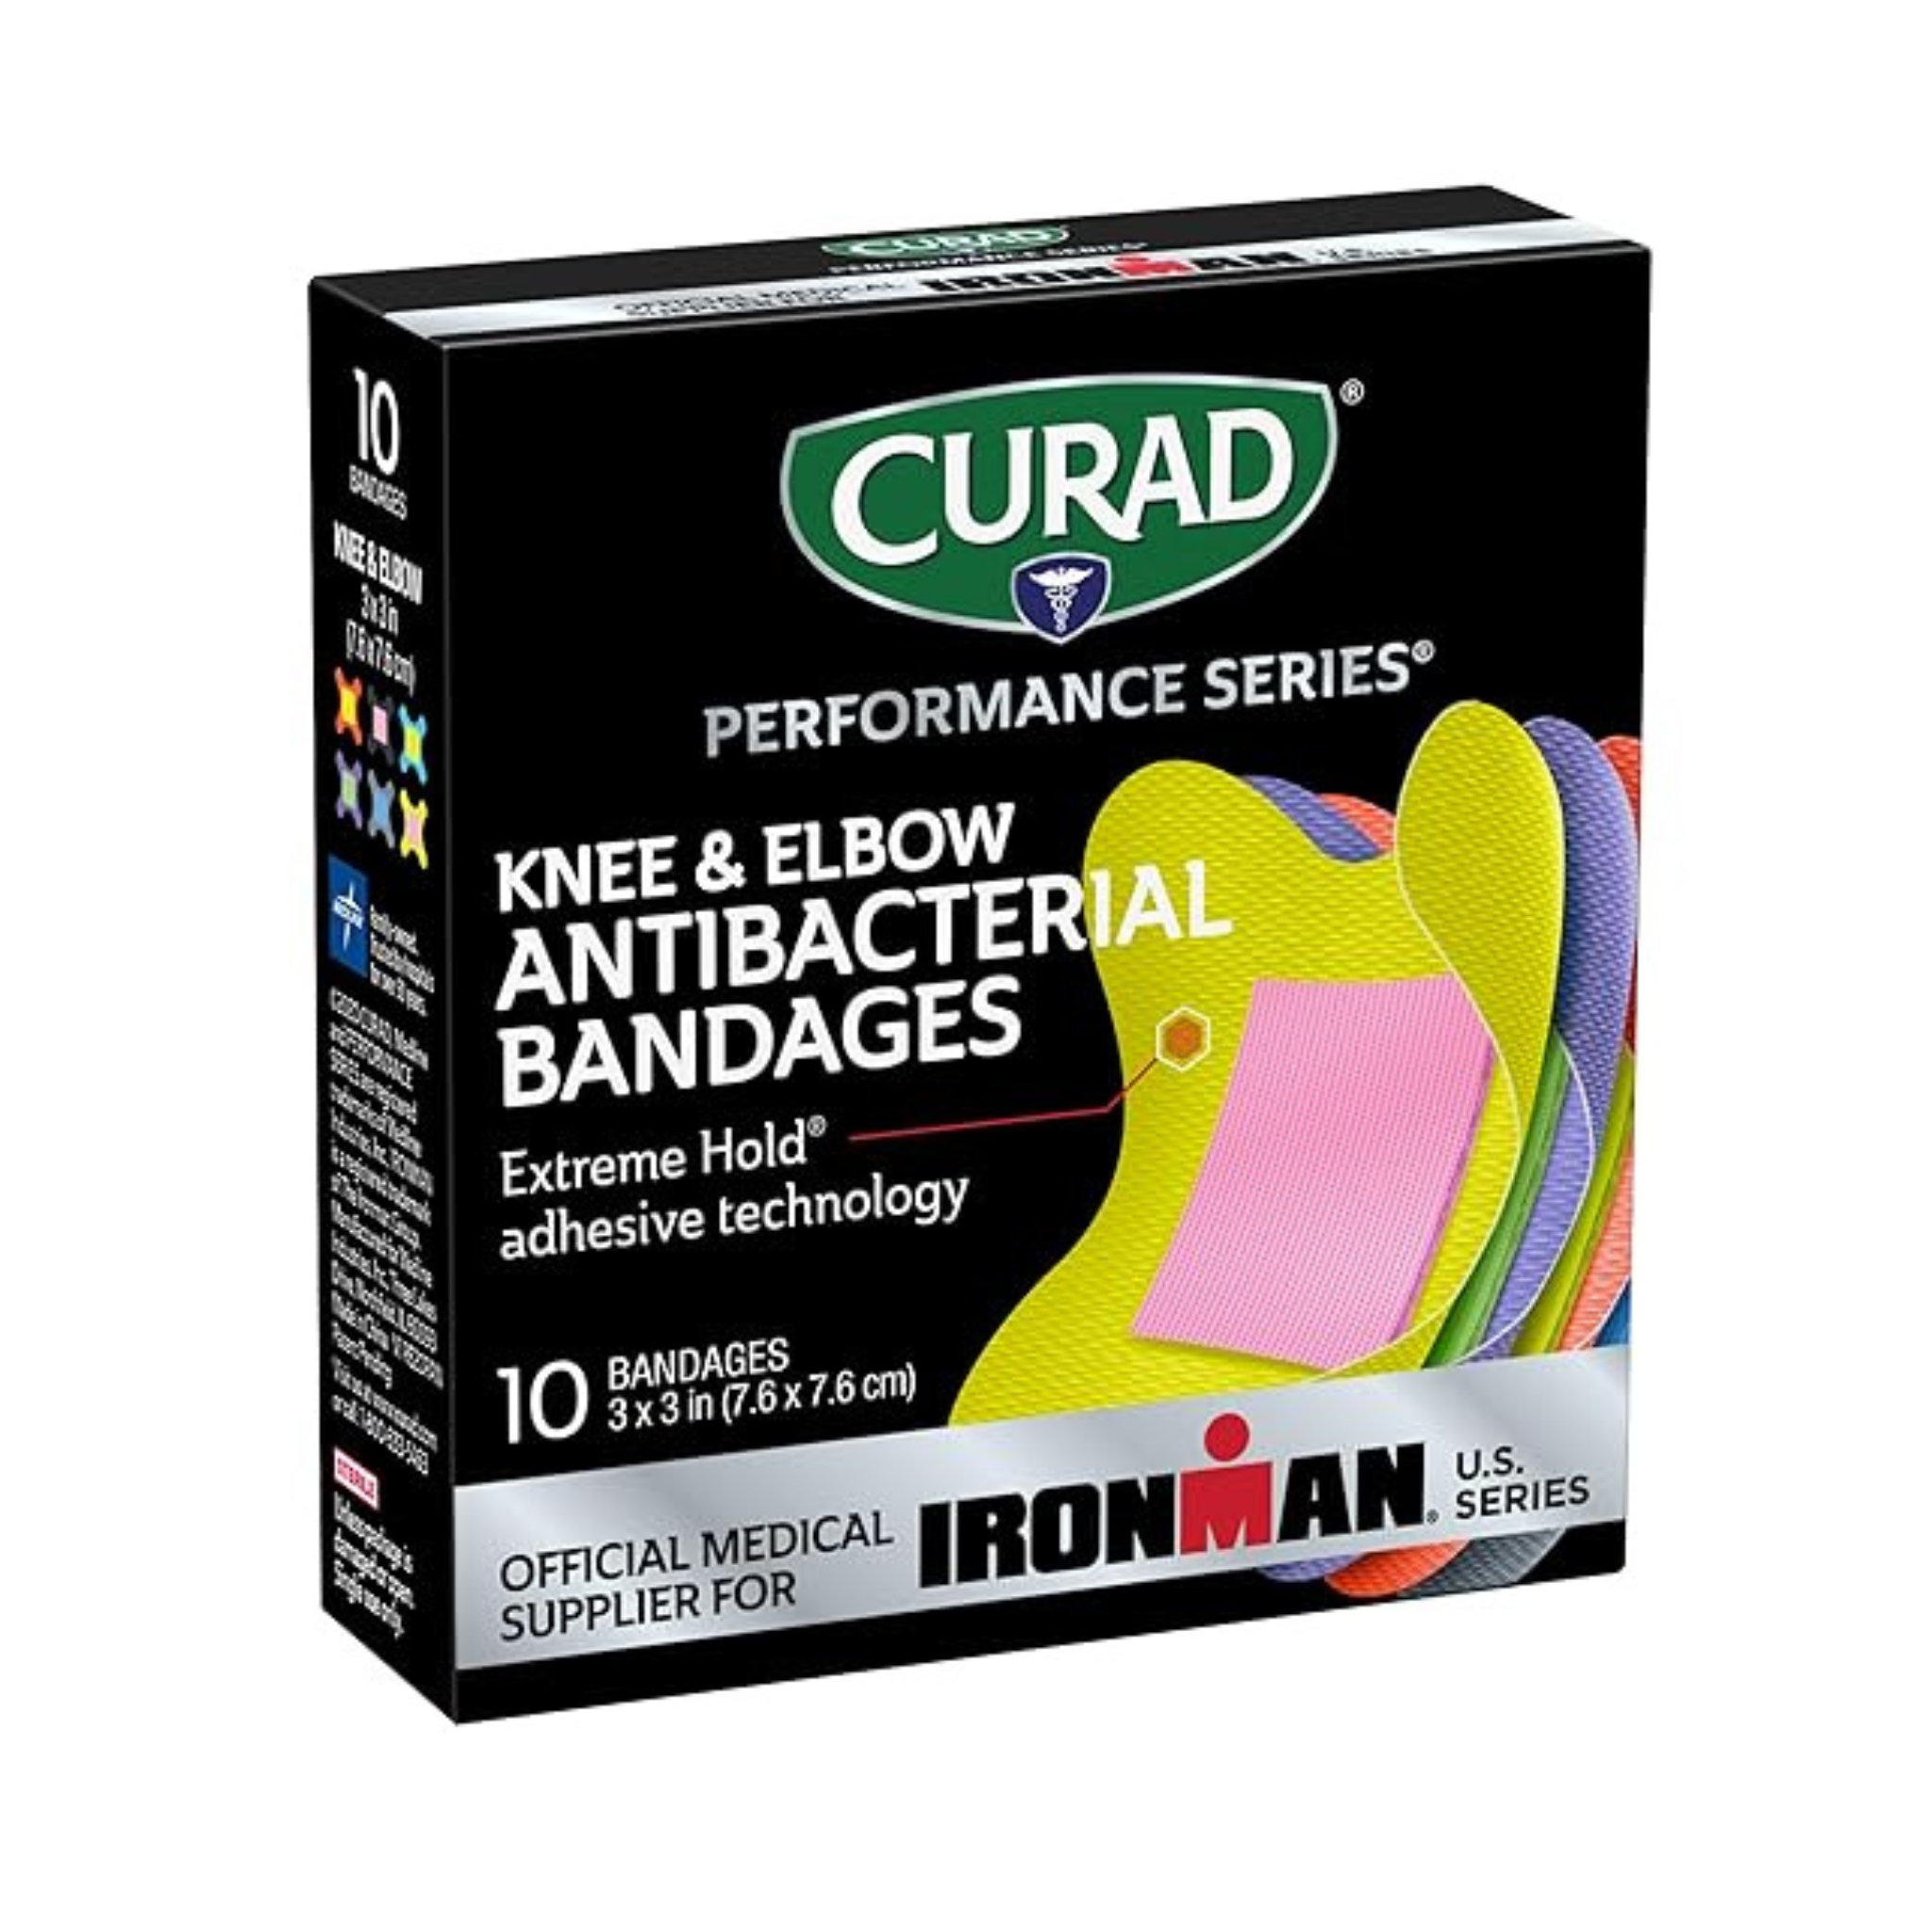 10-Count Curad Performance Ironman Knee & Elbow Antibacterial Bandages